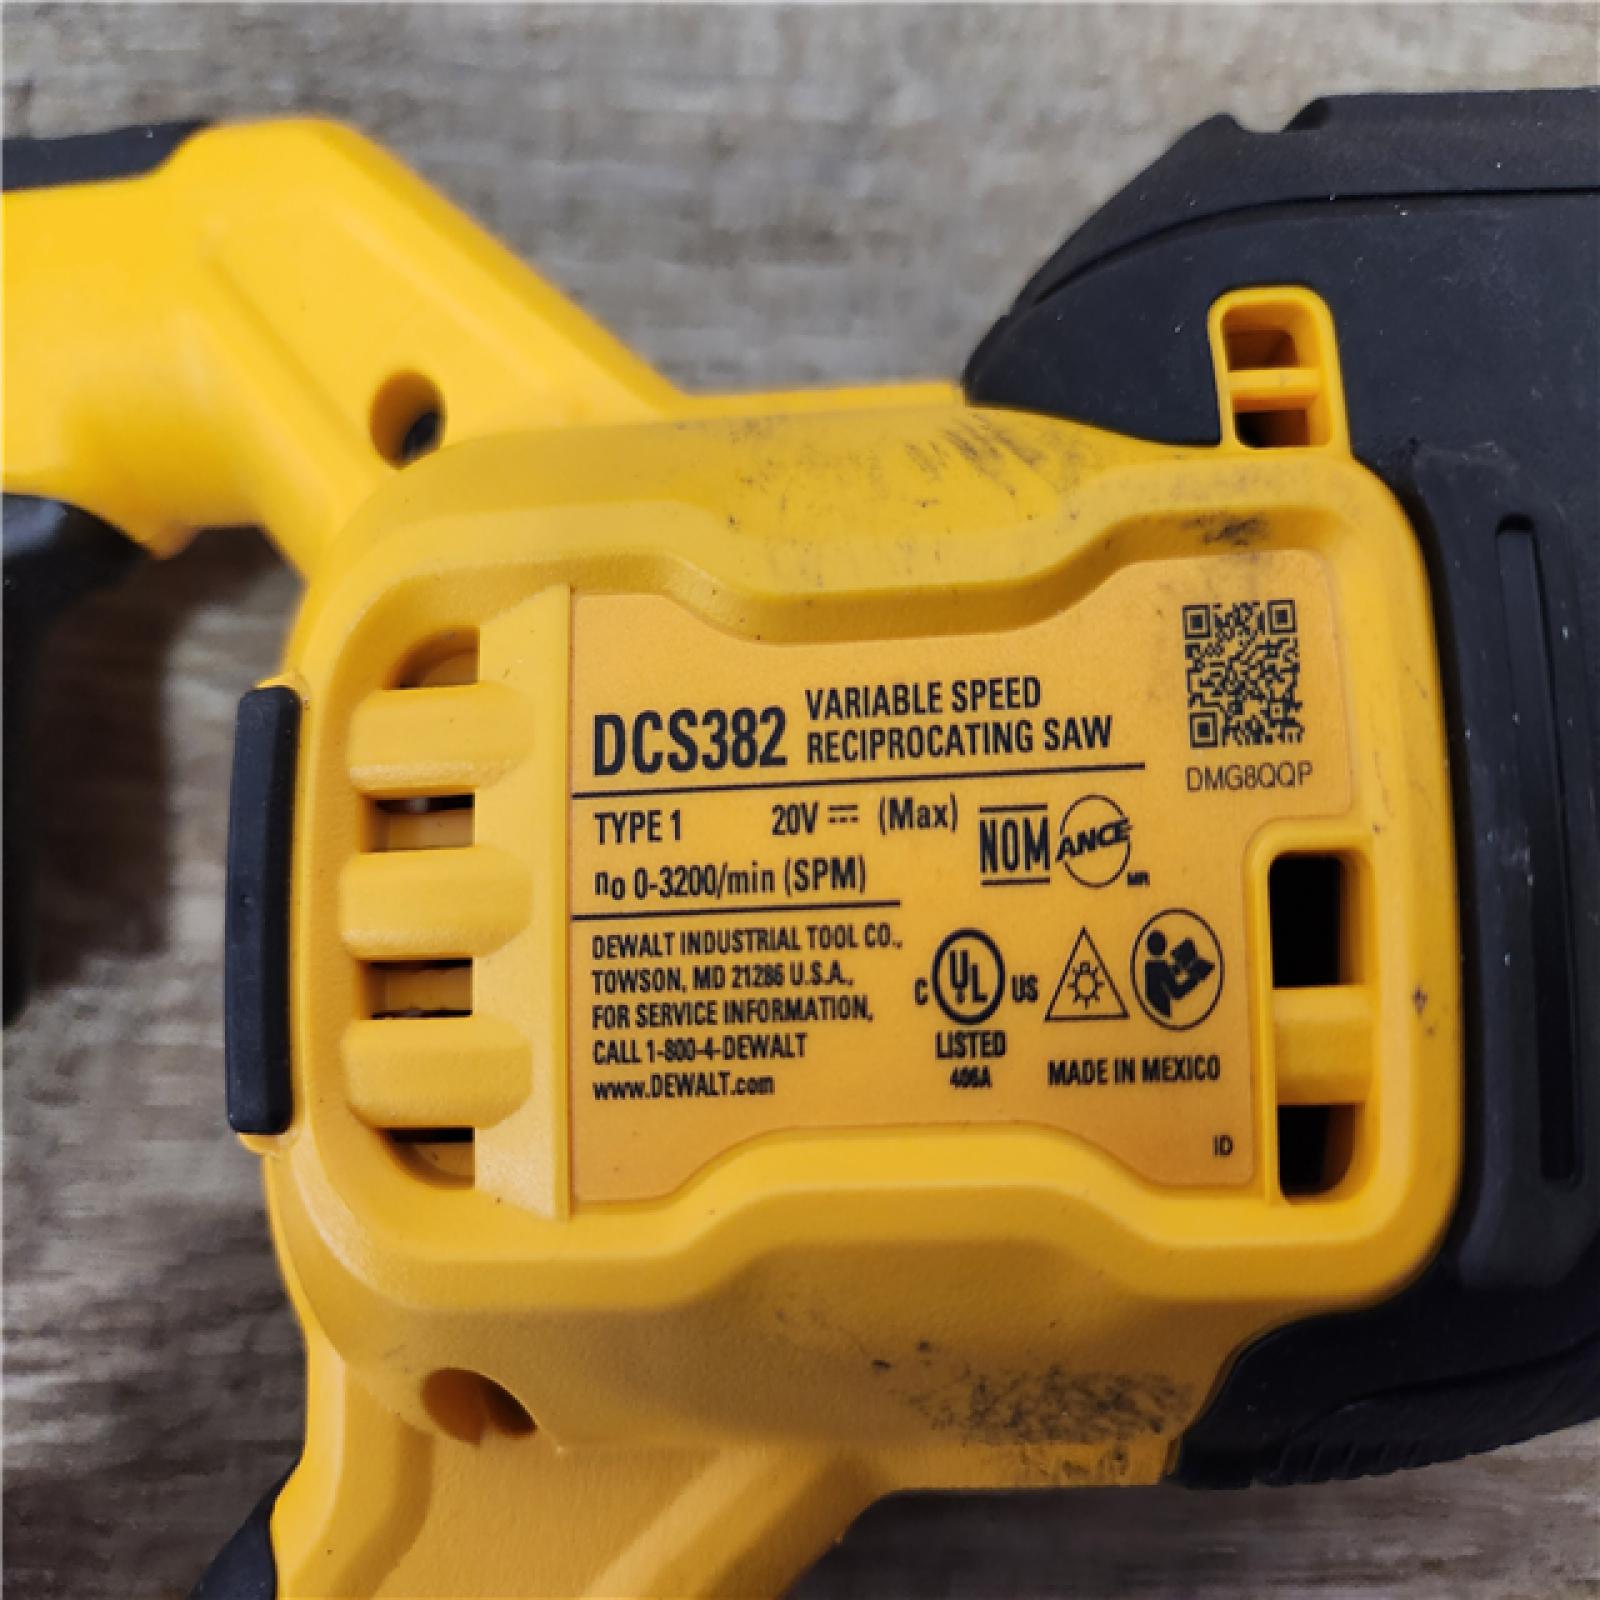 Phoenix Location DEWALT 20V MAX XR Cordless Brushless Reciprocating Saw (Tool Only)